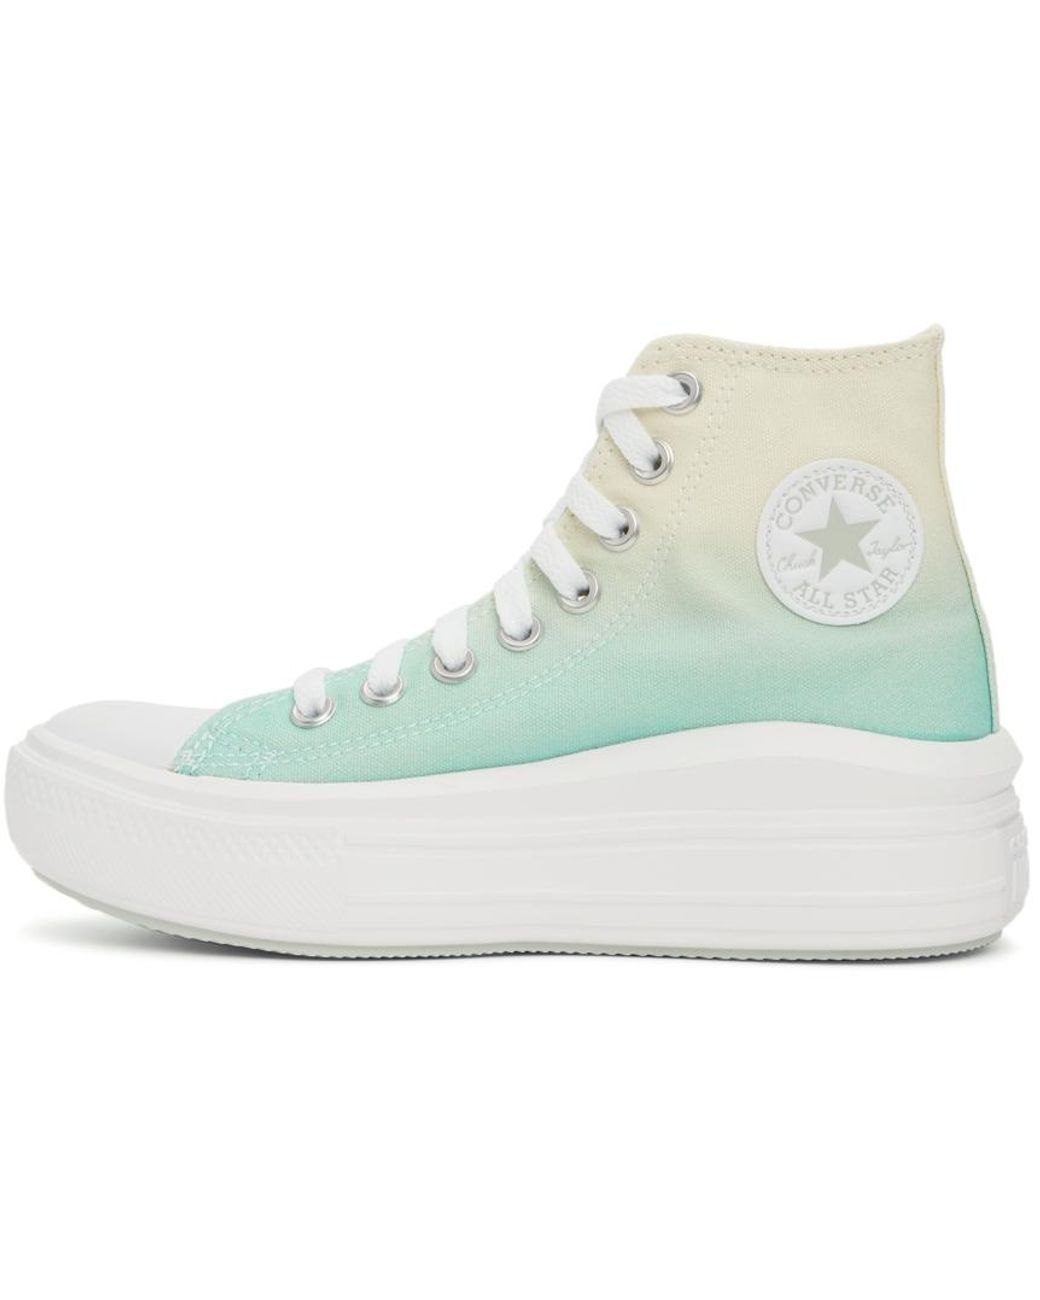 Converse Green & Beige Ombre Chuck Taylor All Star Move Hi Sneakers | Lyst